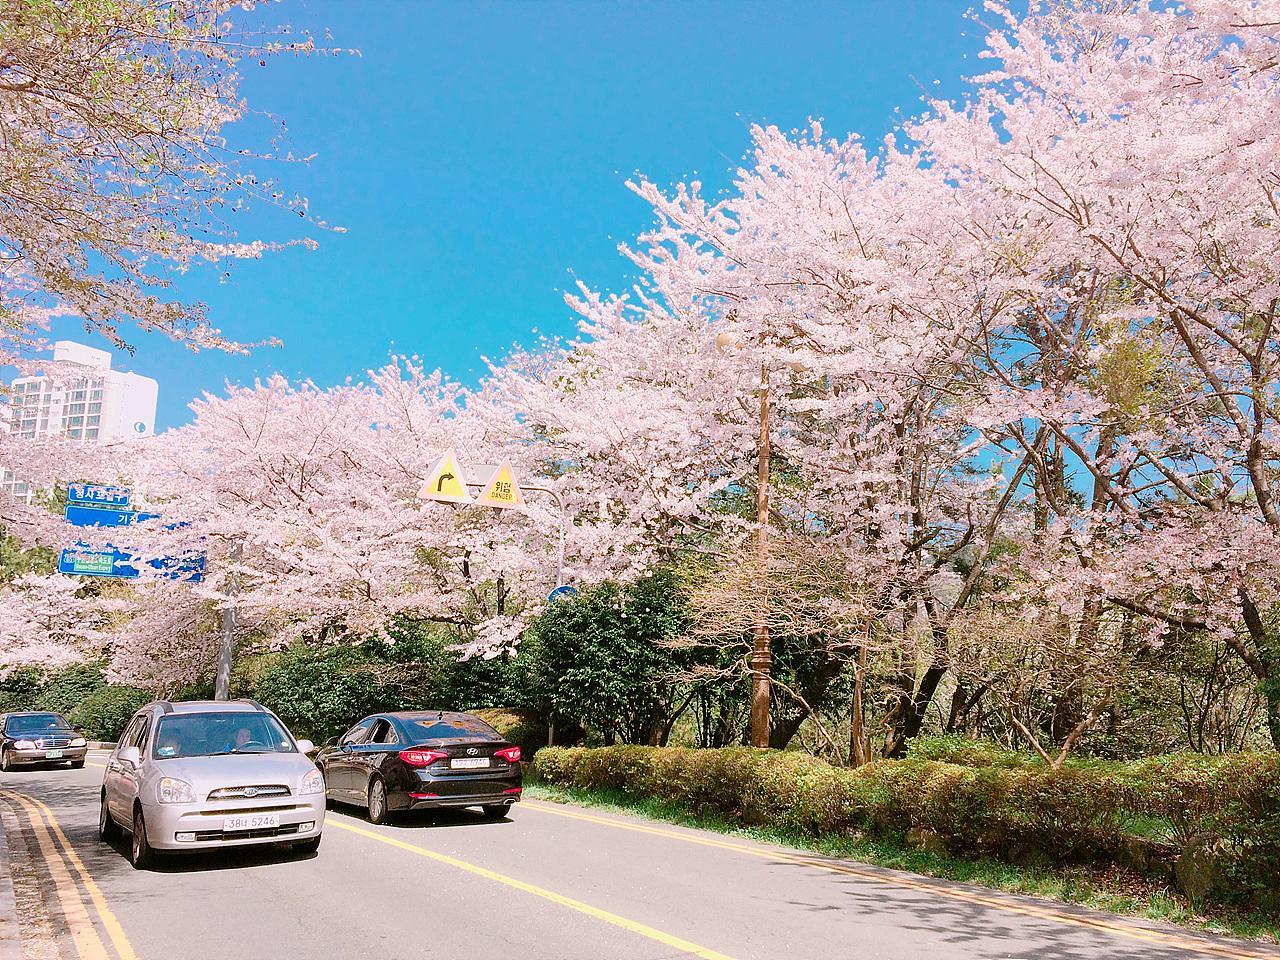 Scenic drive on winding road, colorful flowers and trees, blue sky with parked car and tire in foreground.